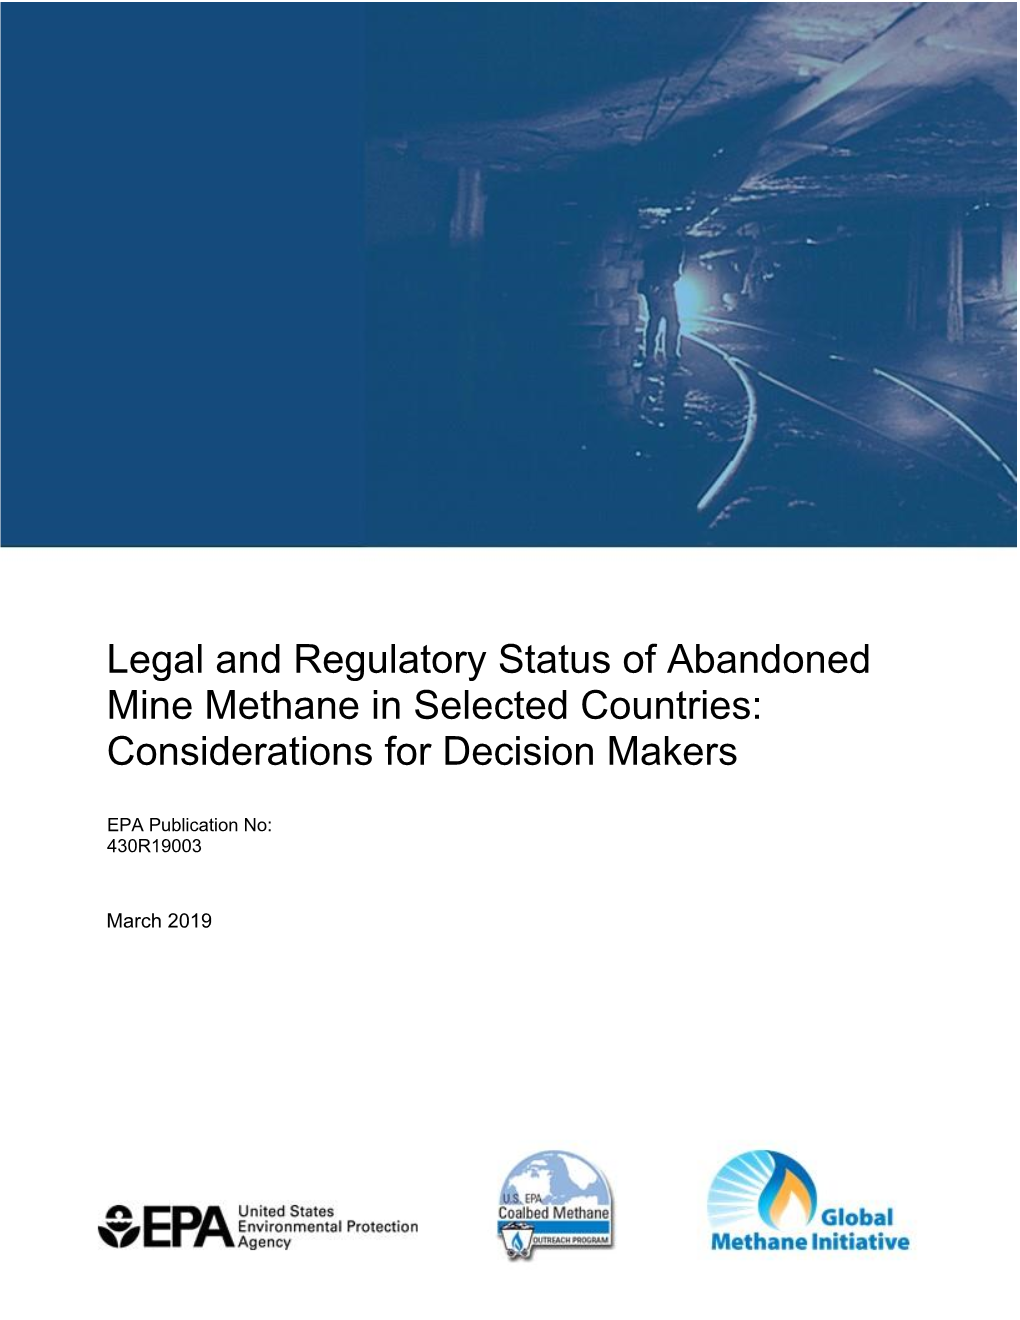 Legal and Regulatory Status of Abandoned Mine Methane in Selected Countries: Considerations for Decision Makers